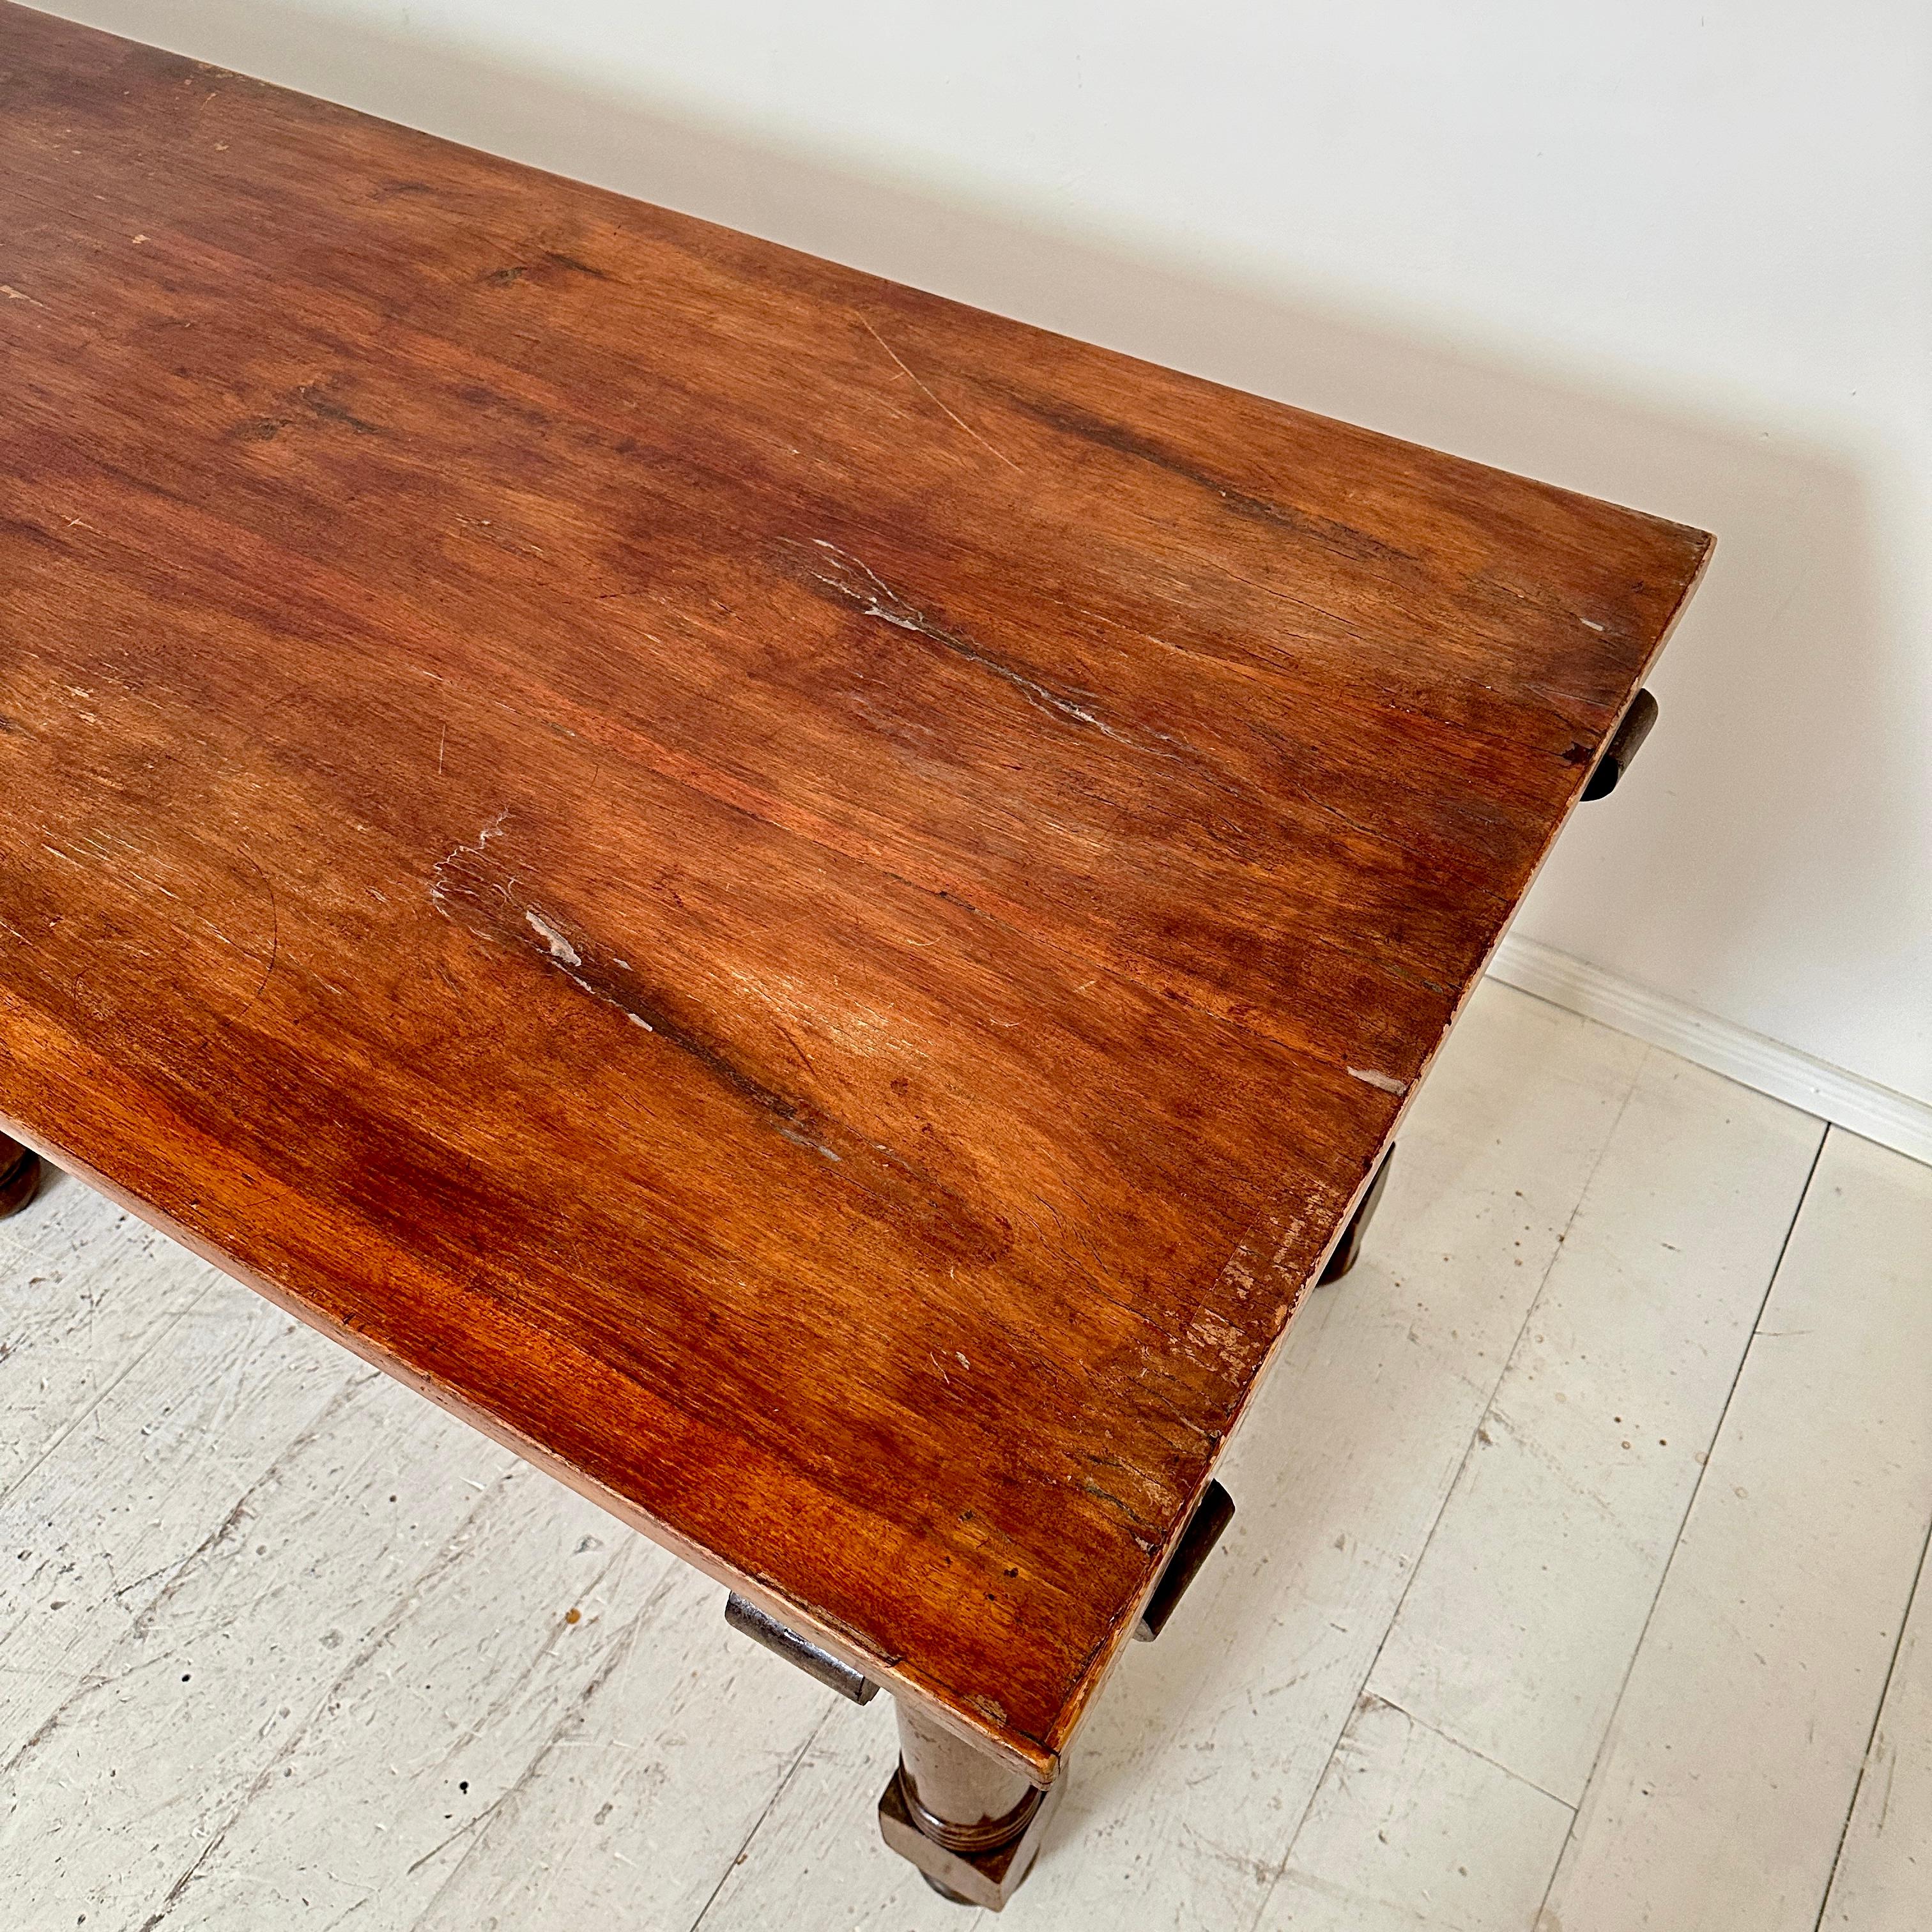 Late 19th Century Italian Large Brown Walnut Dining Table with 2 Drawers, 1880 For Sale 8